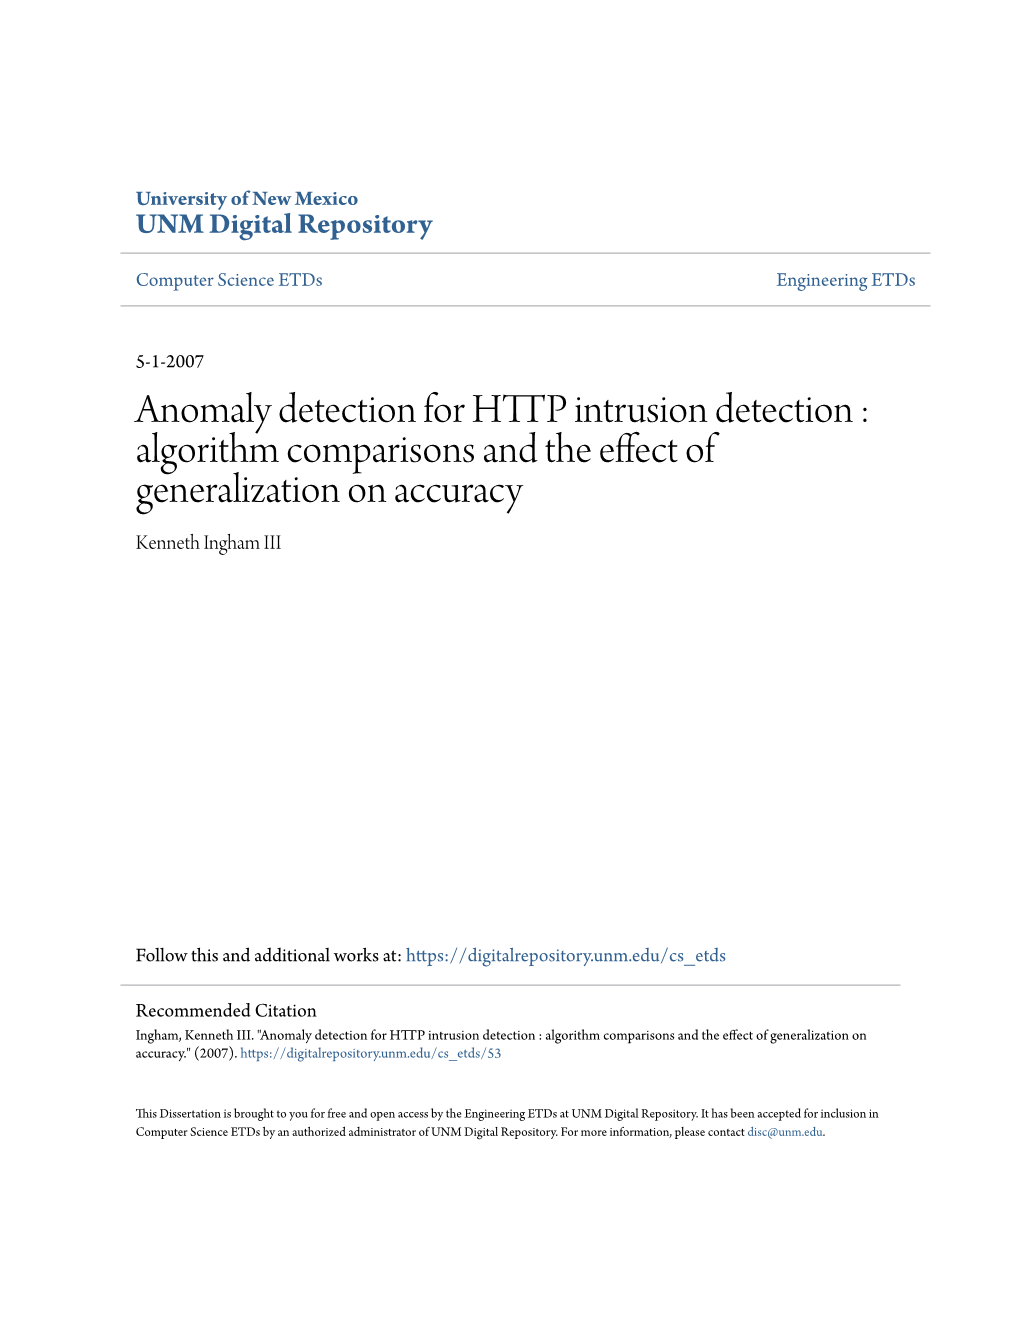 Anomaly Detection for HTTP Intrusion Detection : Algorithm Comparisons and the Effect of Generalization on Accuracy Kenneth Ingham III